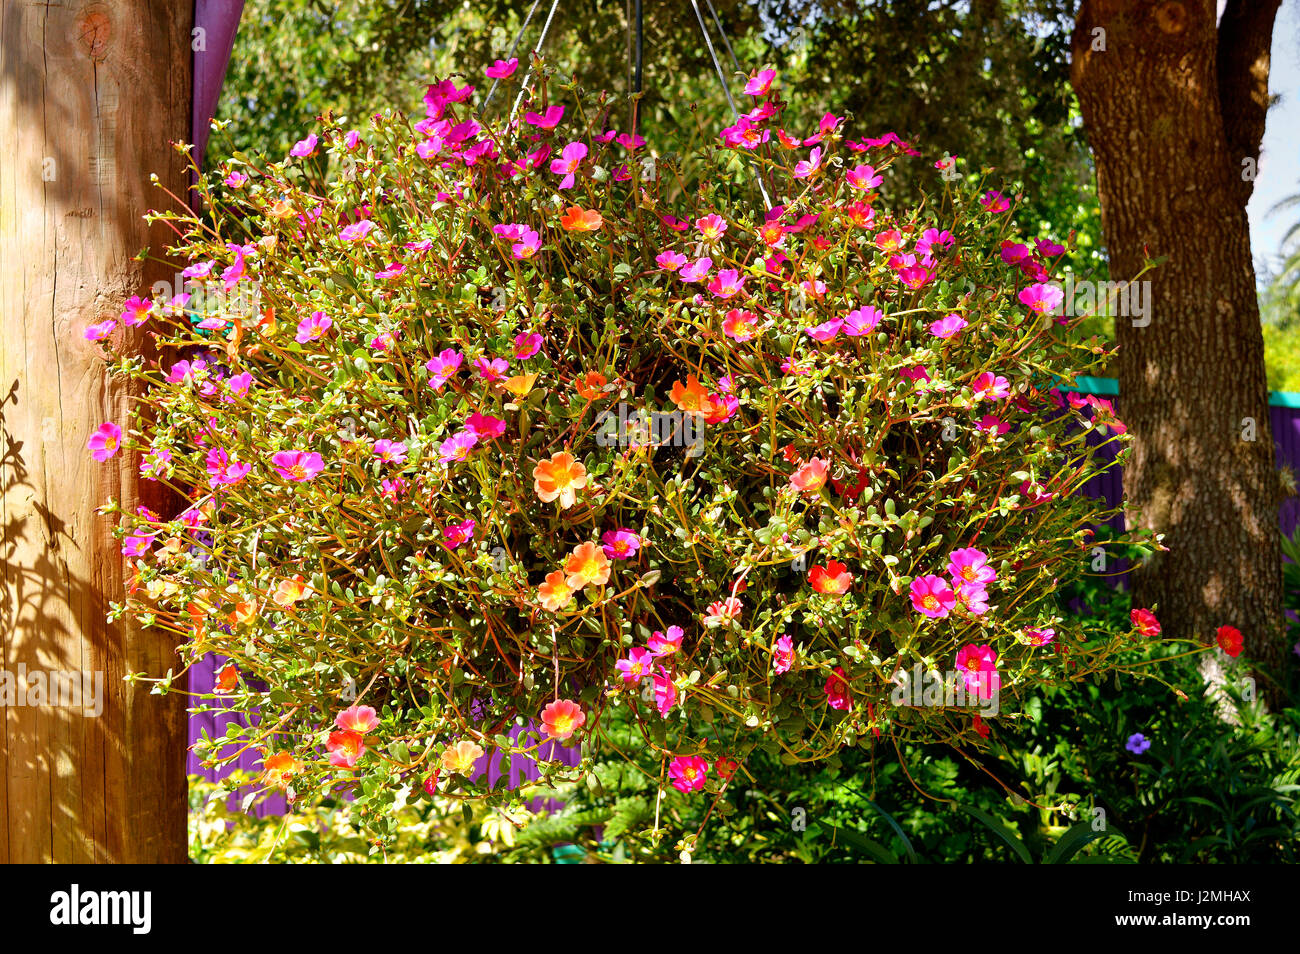 Shrubby Purslane Latin name Portulaca suffrutescens flowers in a hanging basket Stock Photo